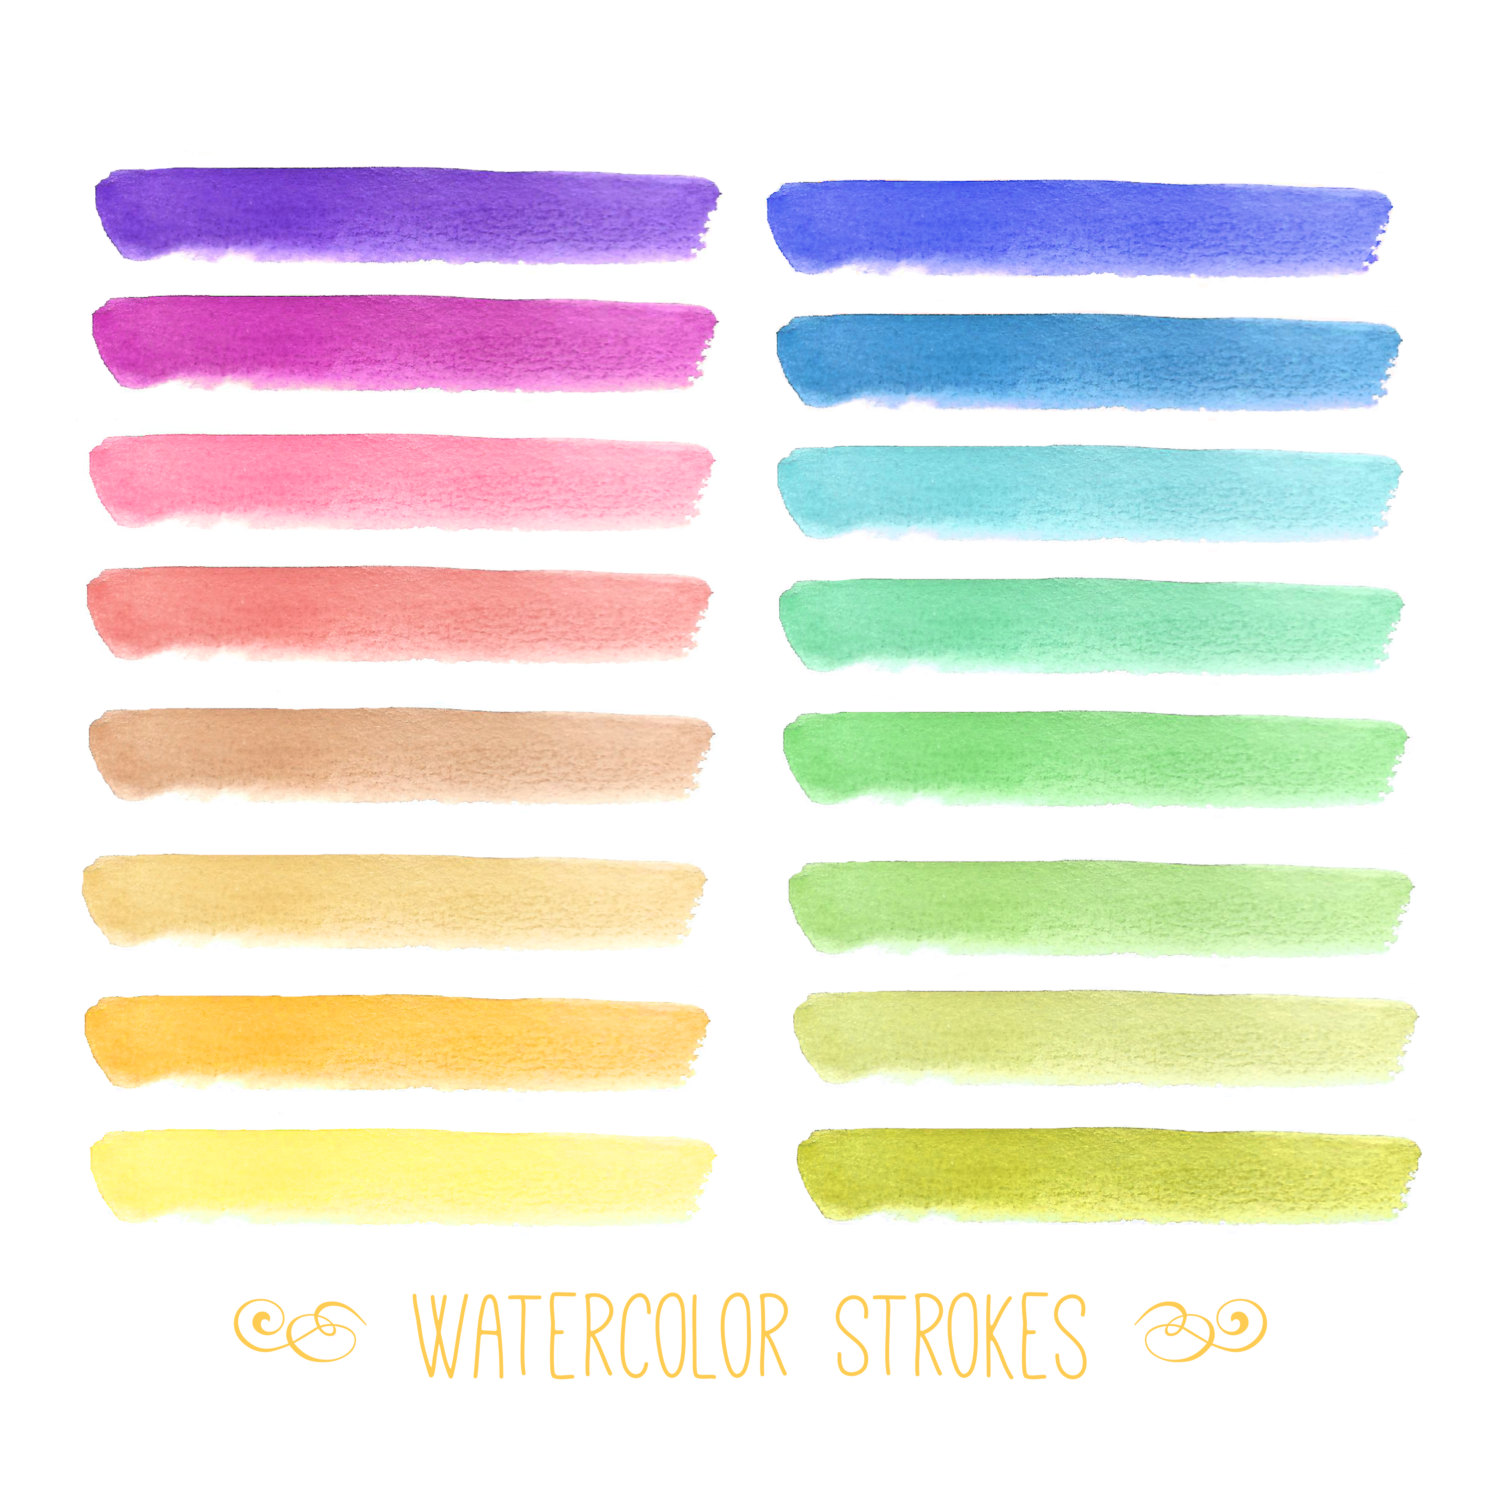 CLIP ART: Watercolor Paint Strokes // Instant by thePENandBRUSH 